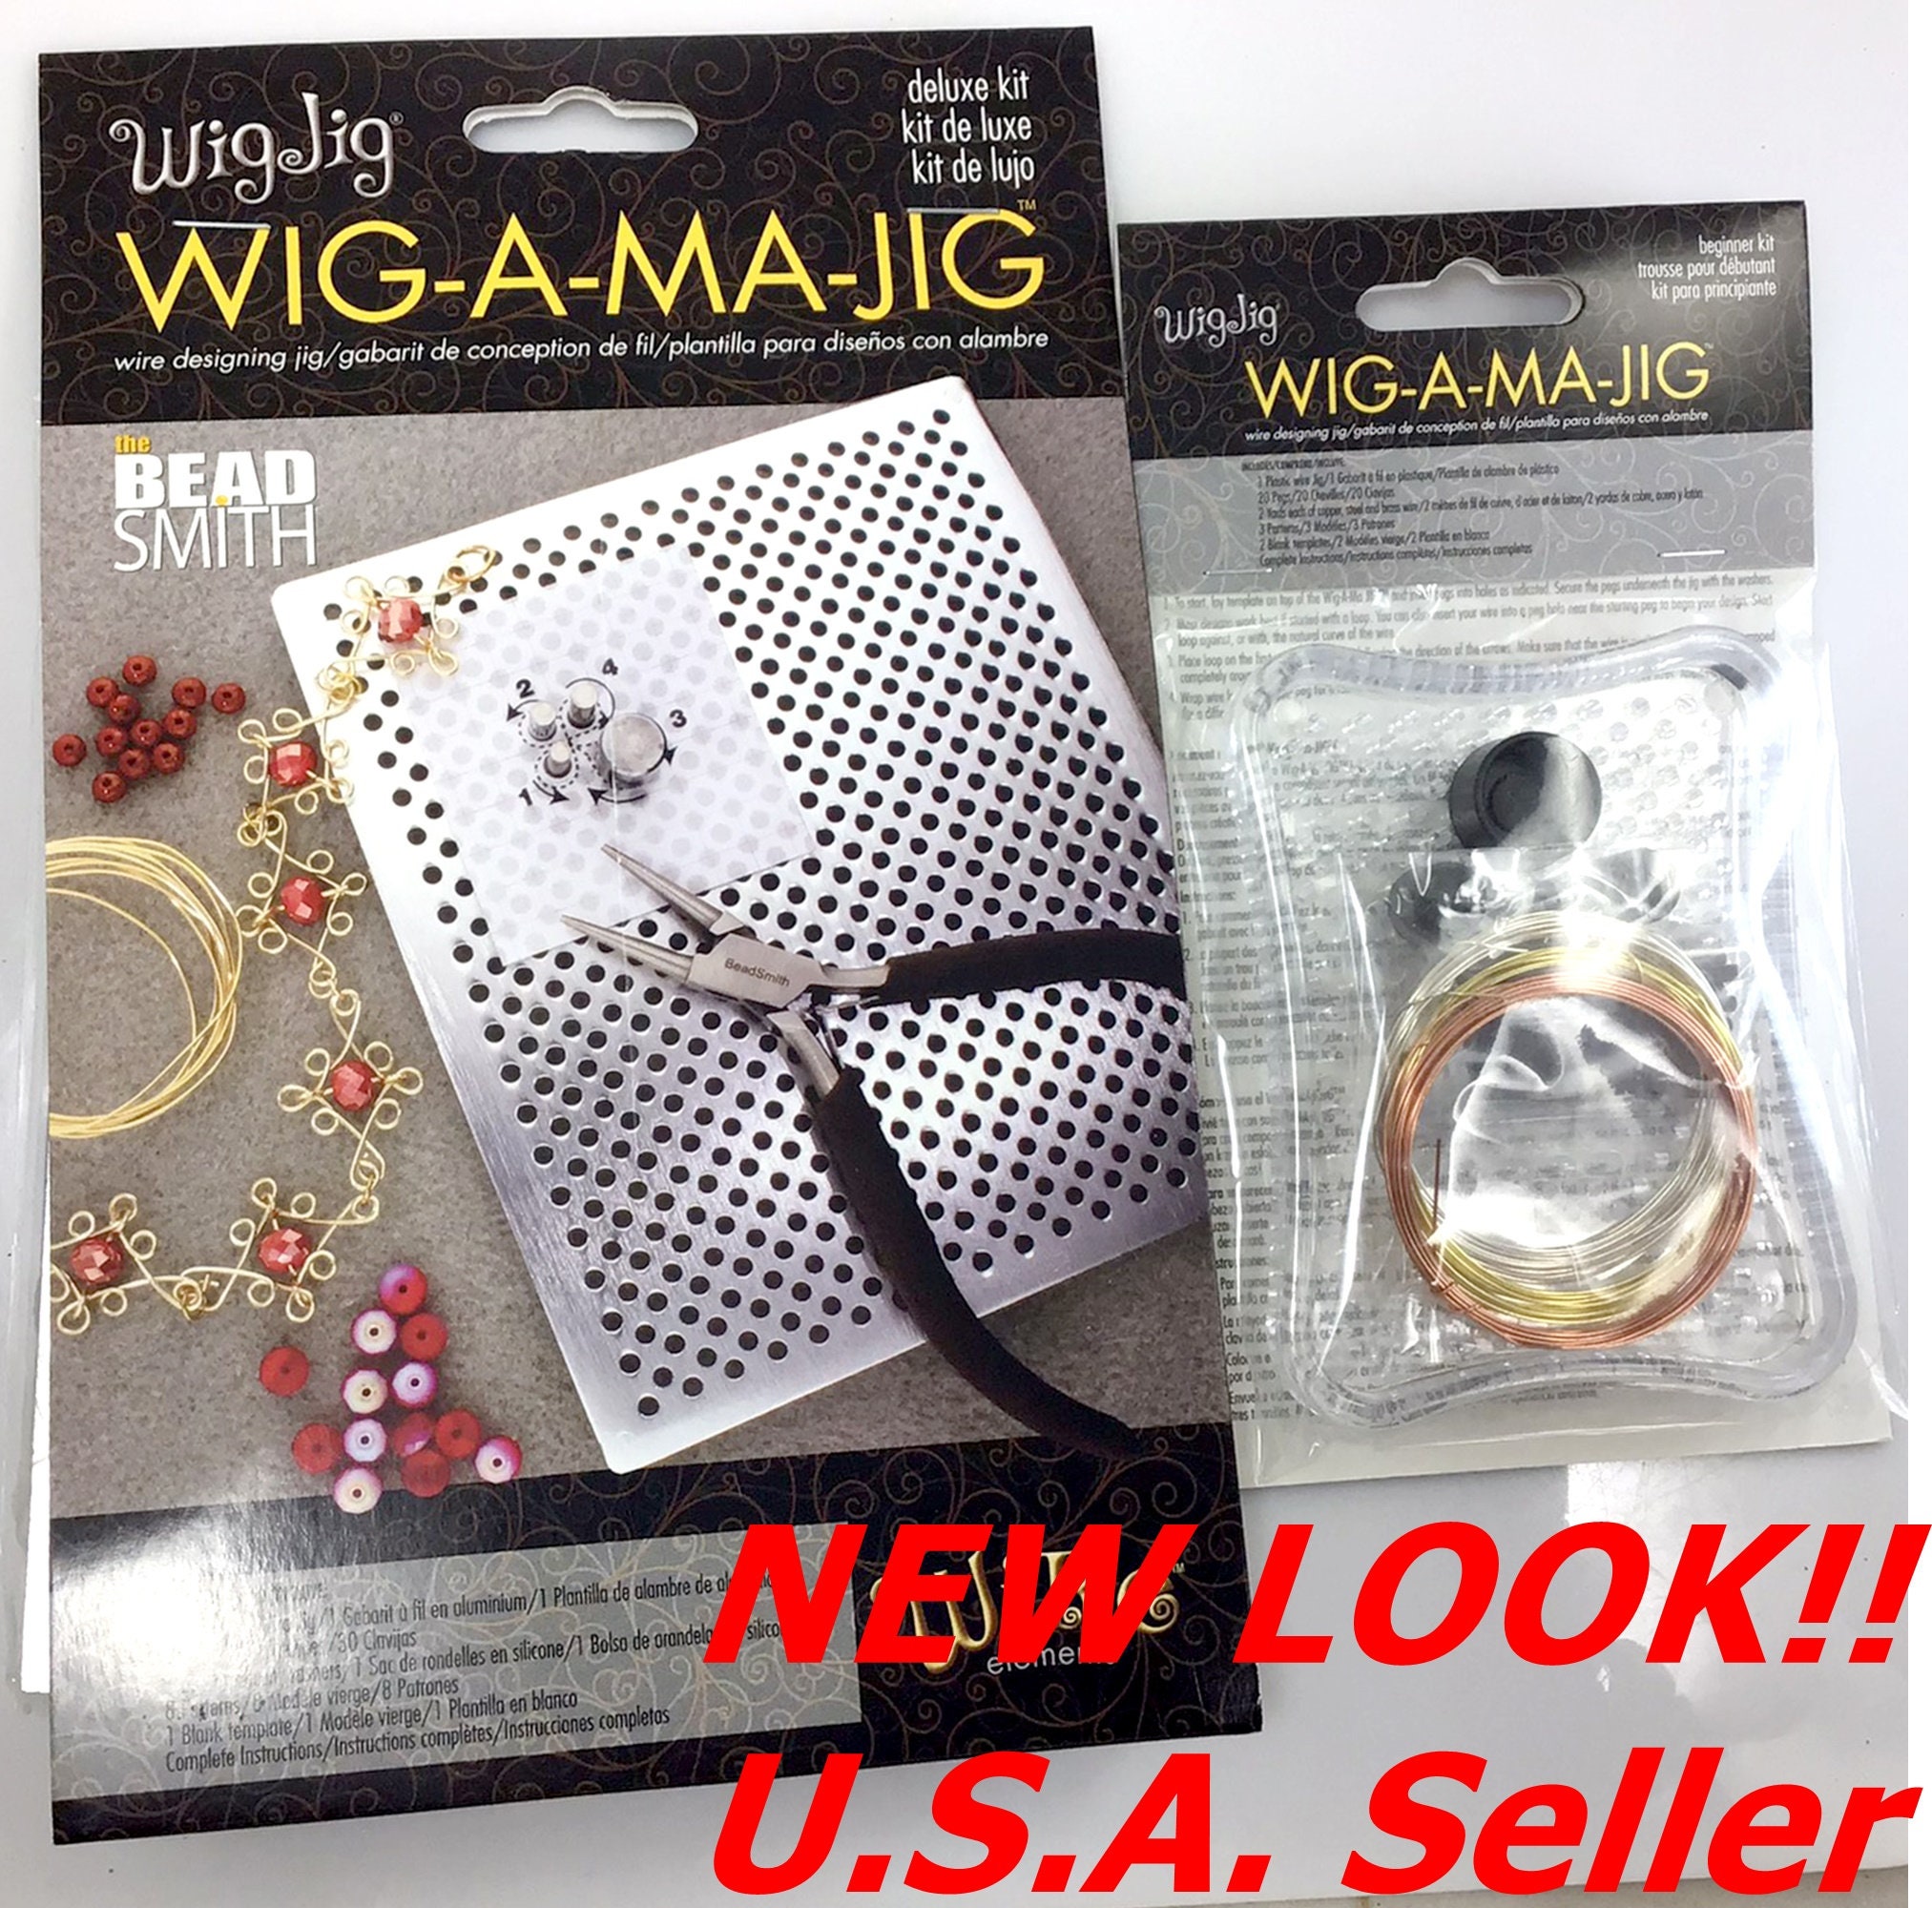 AFFORDABLE WIG MAKING STARTER KIT FOR BEGINNERS  basics to make a wig at  home HEADMISTRESS 